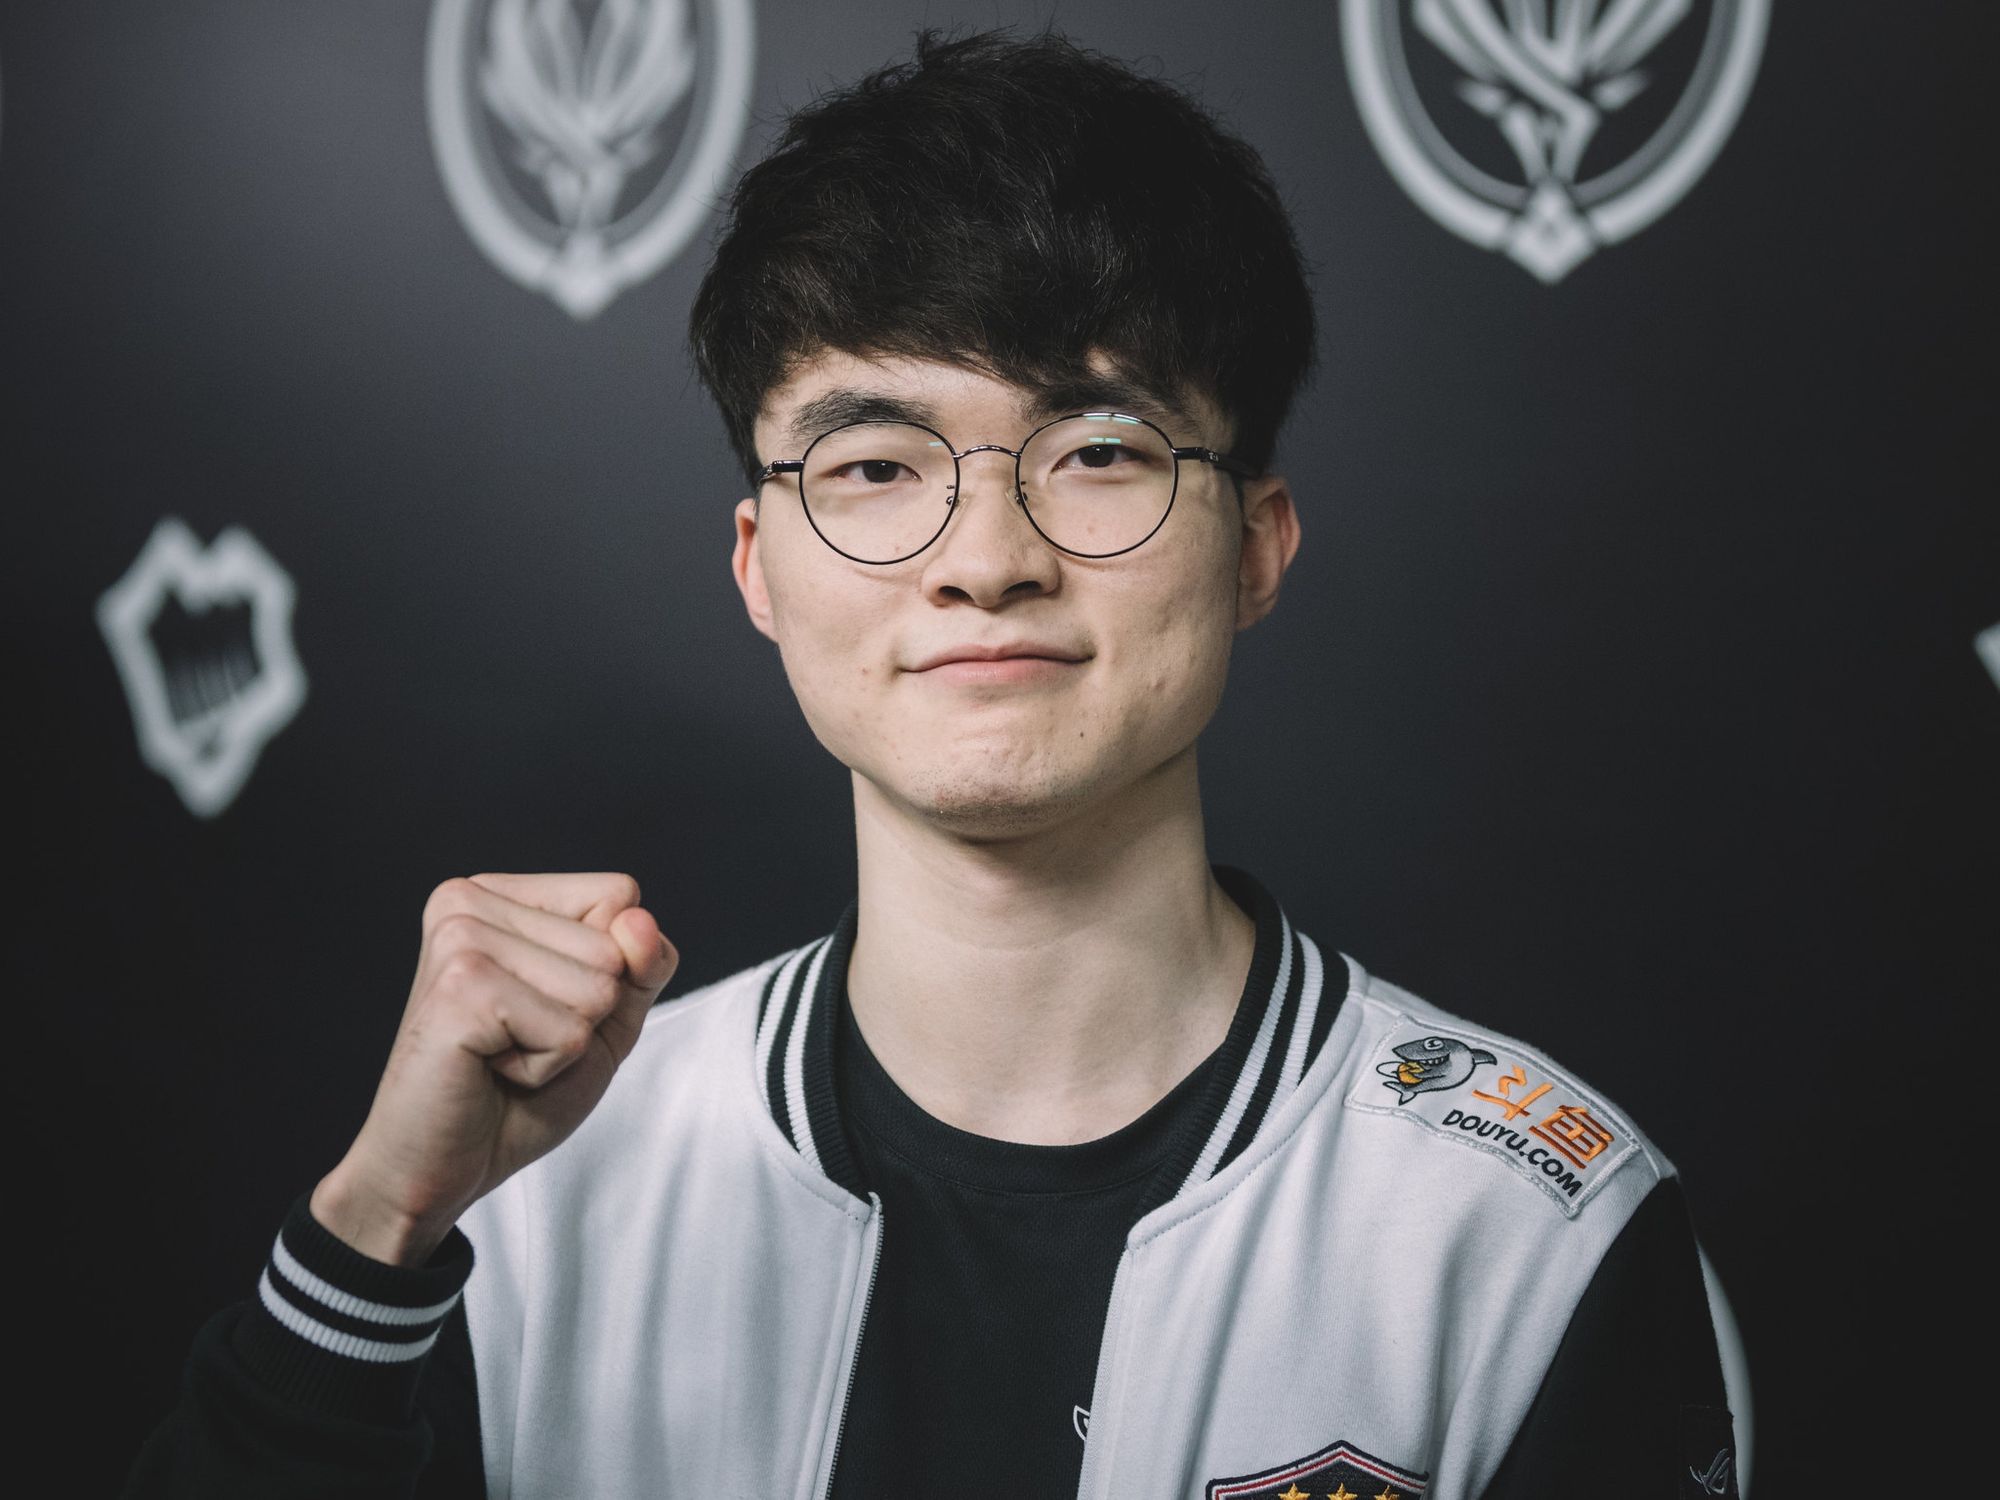 Riot speeds up in the race for women's inclusion in LoL esports